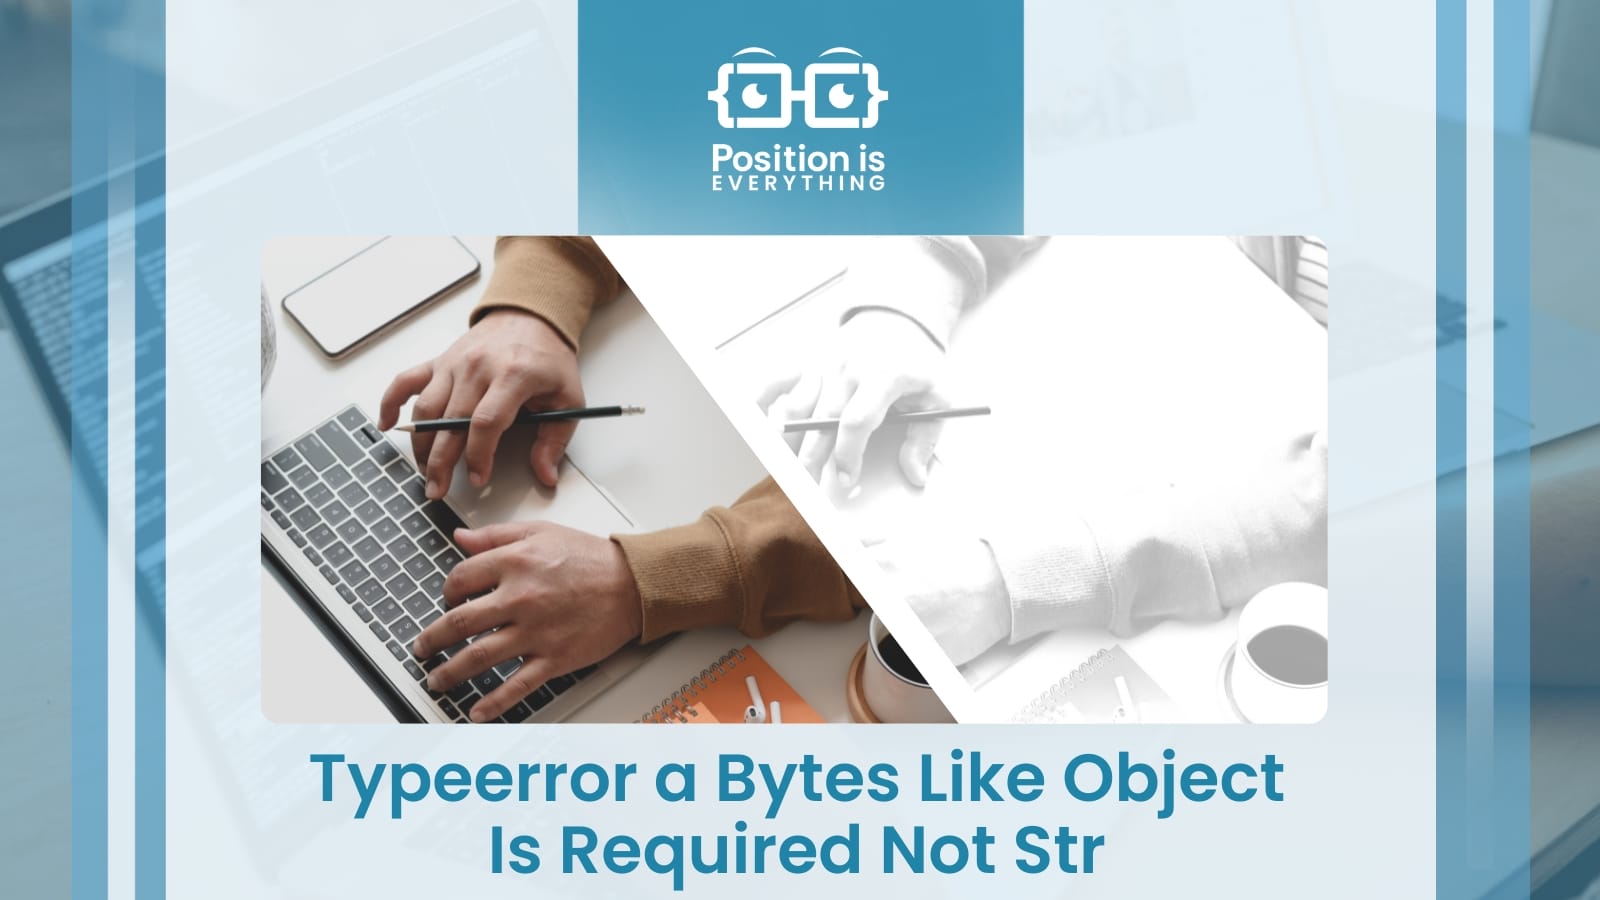 Typeerror A Bytes Like Object Is Required Not Str: Fixed